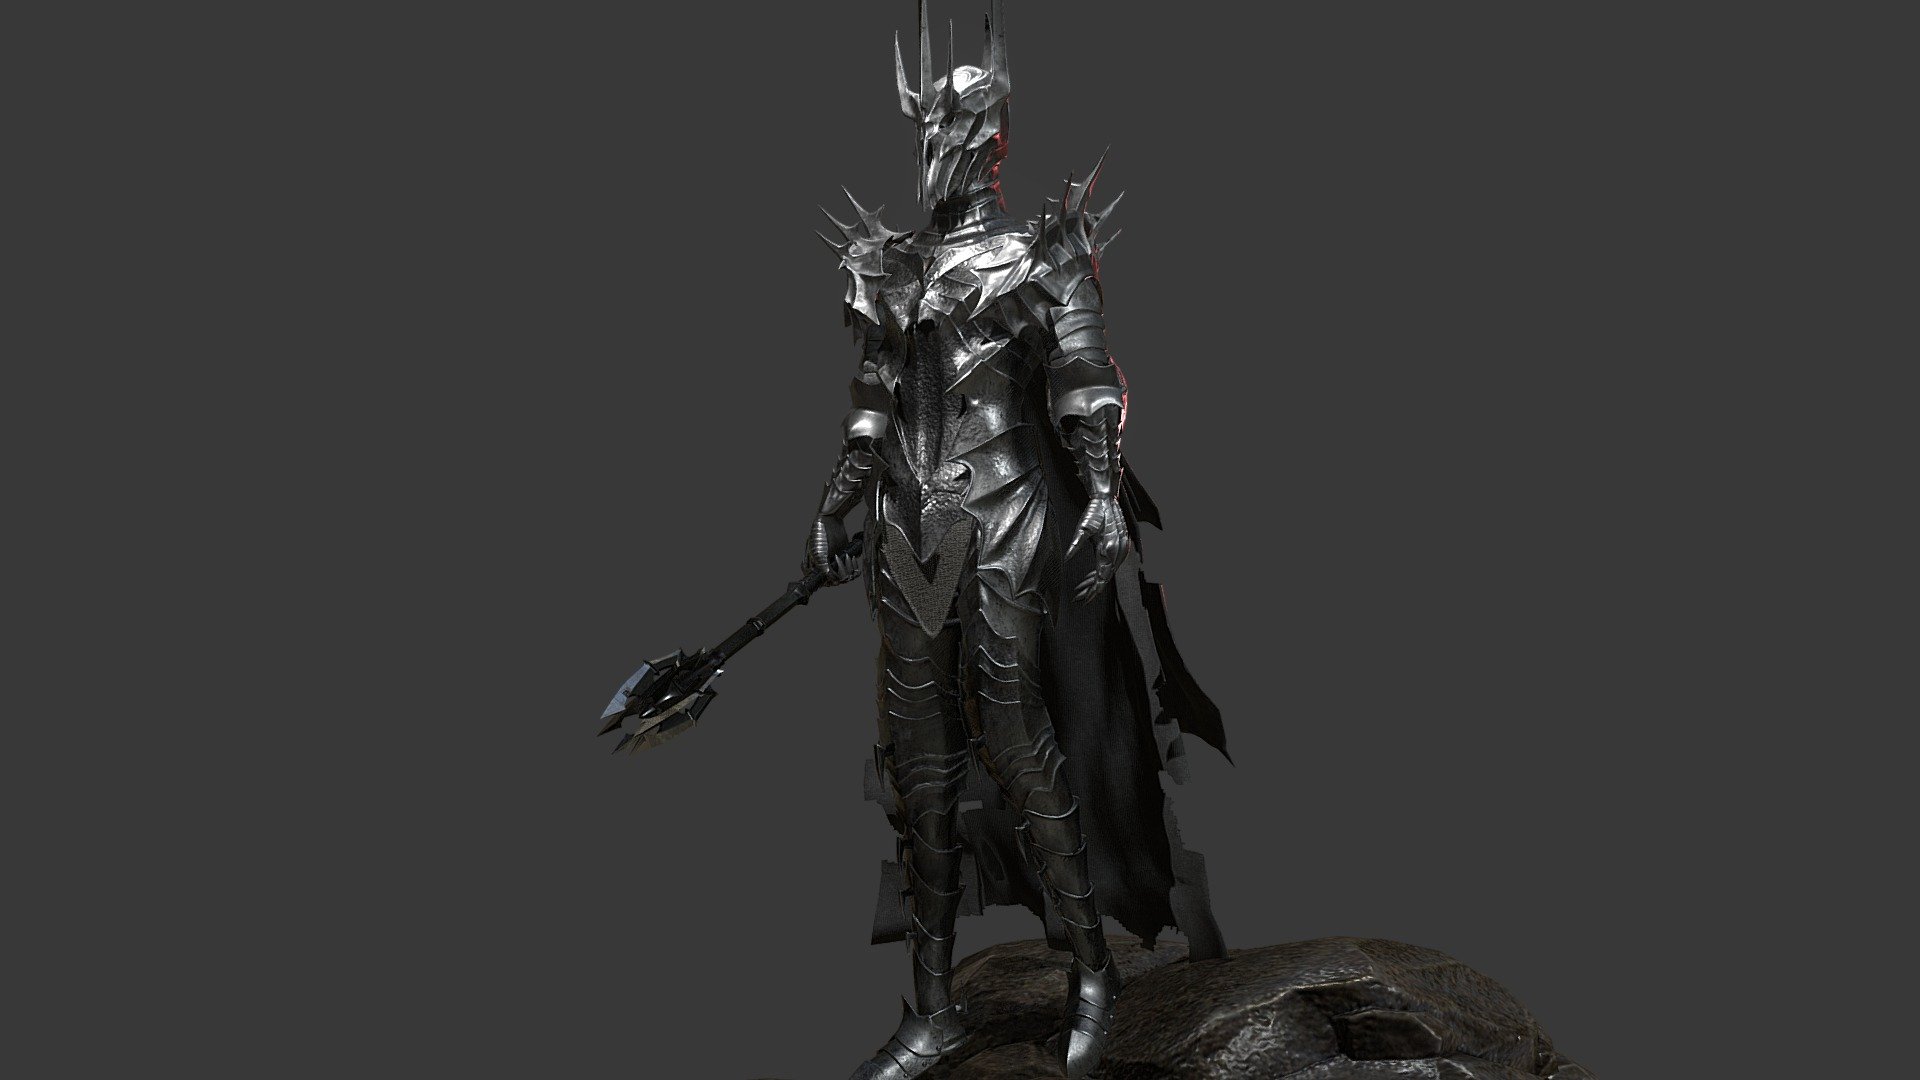 Hello community. I'm huge fan of Lord of the rings and Sauron. Here is my recent work. Game ready dark lord model. Have a fun. If you need additional file. contact me. :)
Native: Blender 3.3
Rendered in Blender eevee.
Textures.rar, Fbx, Obj, Blender file included

PBR textures 2048x2048
Basic rigged

Polycount: 
Total faces- 43.4k
Total verts- 43.3k

Full body with cape: faces-35k verts -36.8k

Mace: faces-4.3k verts-4.3k

Rock: faces-3.9k verts-1.9k

Ring: faces-144 - Sauron Game-ready character - 3D model by munkhartist 3d model